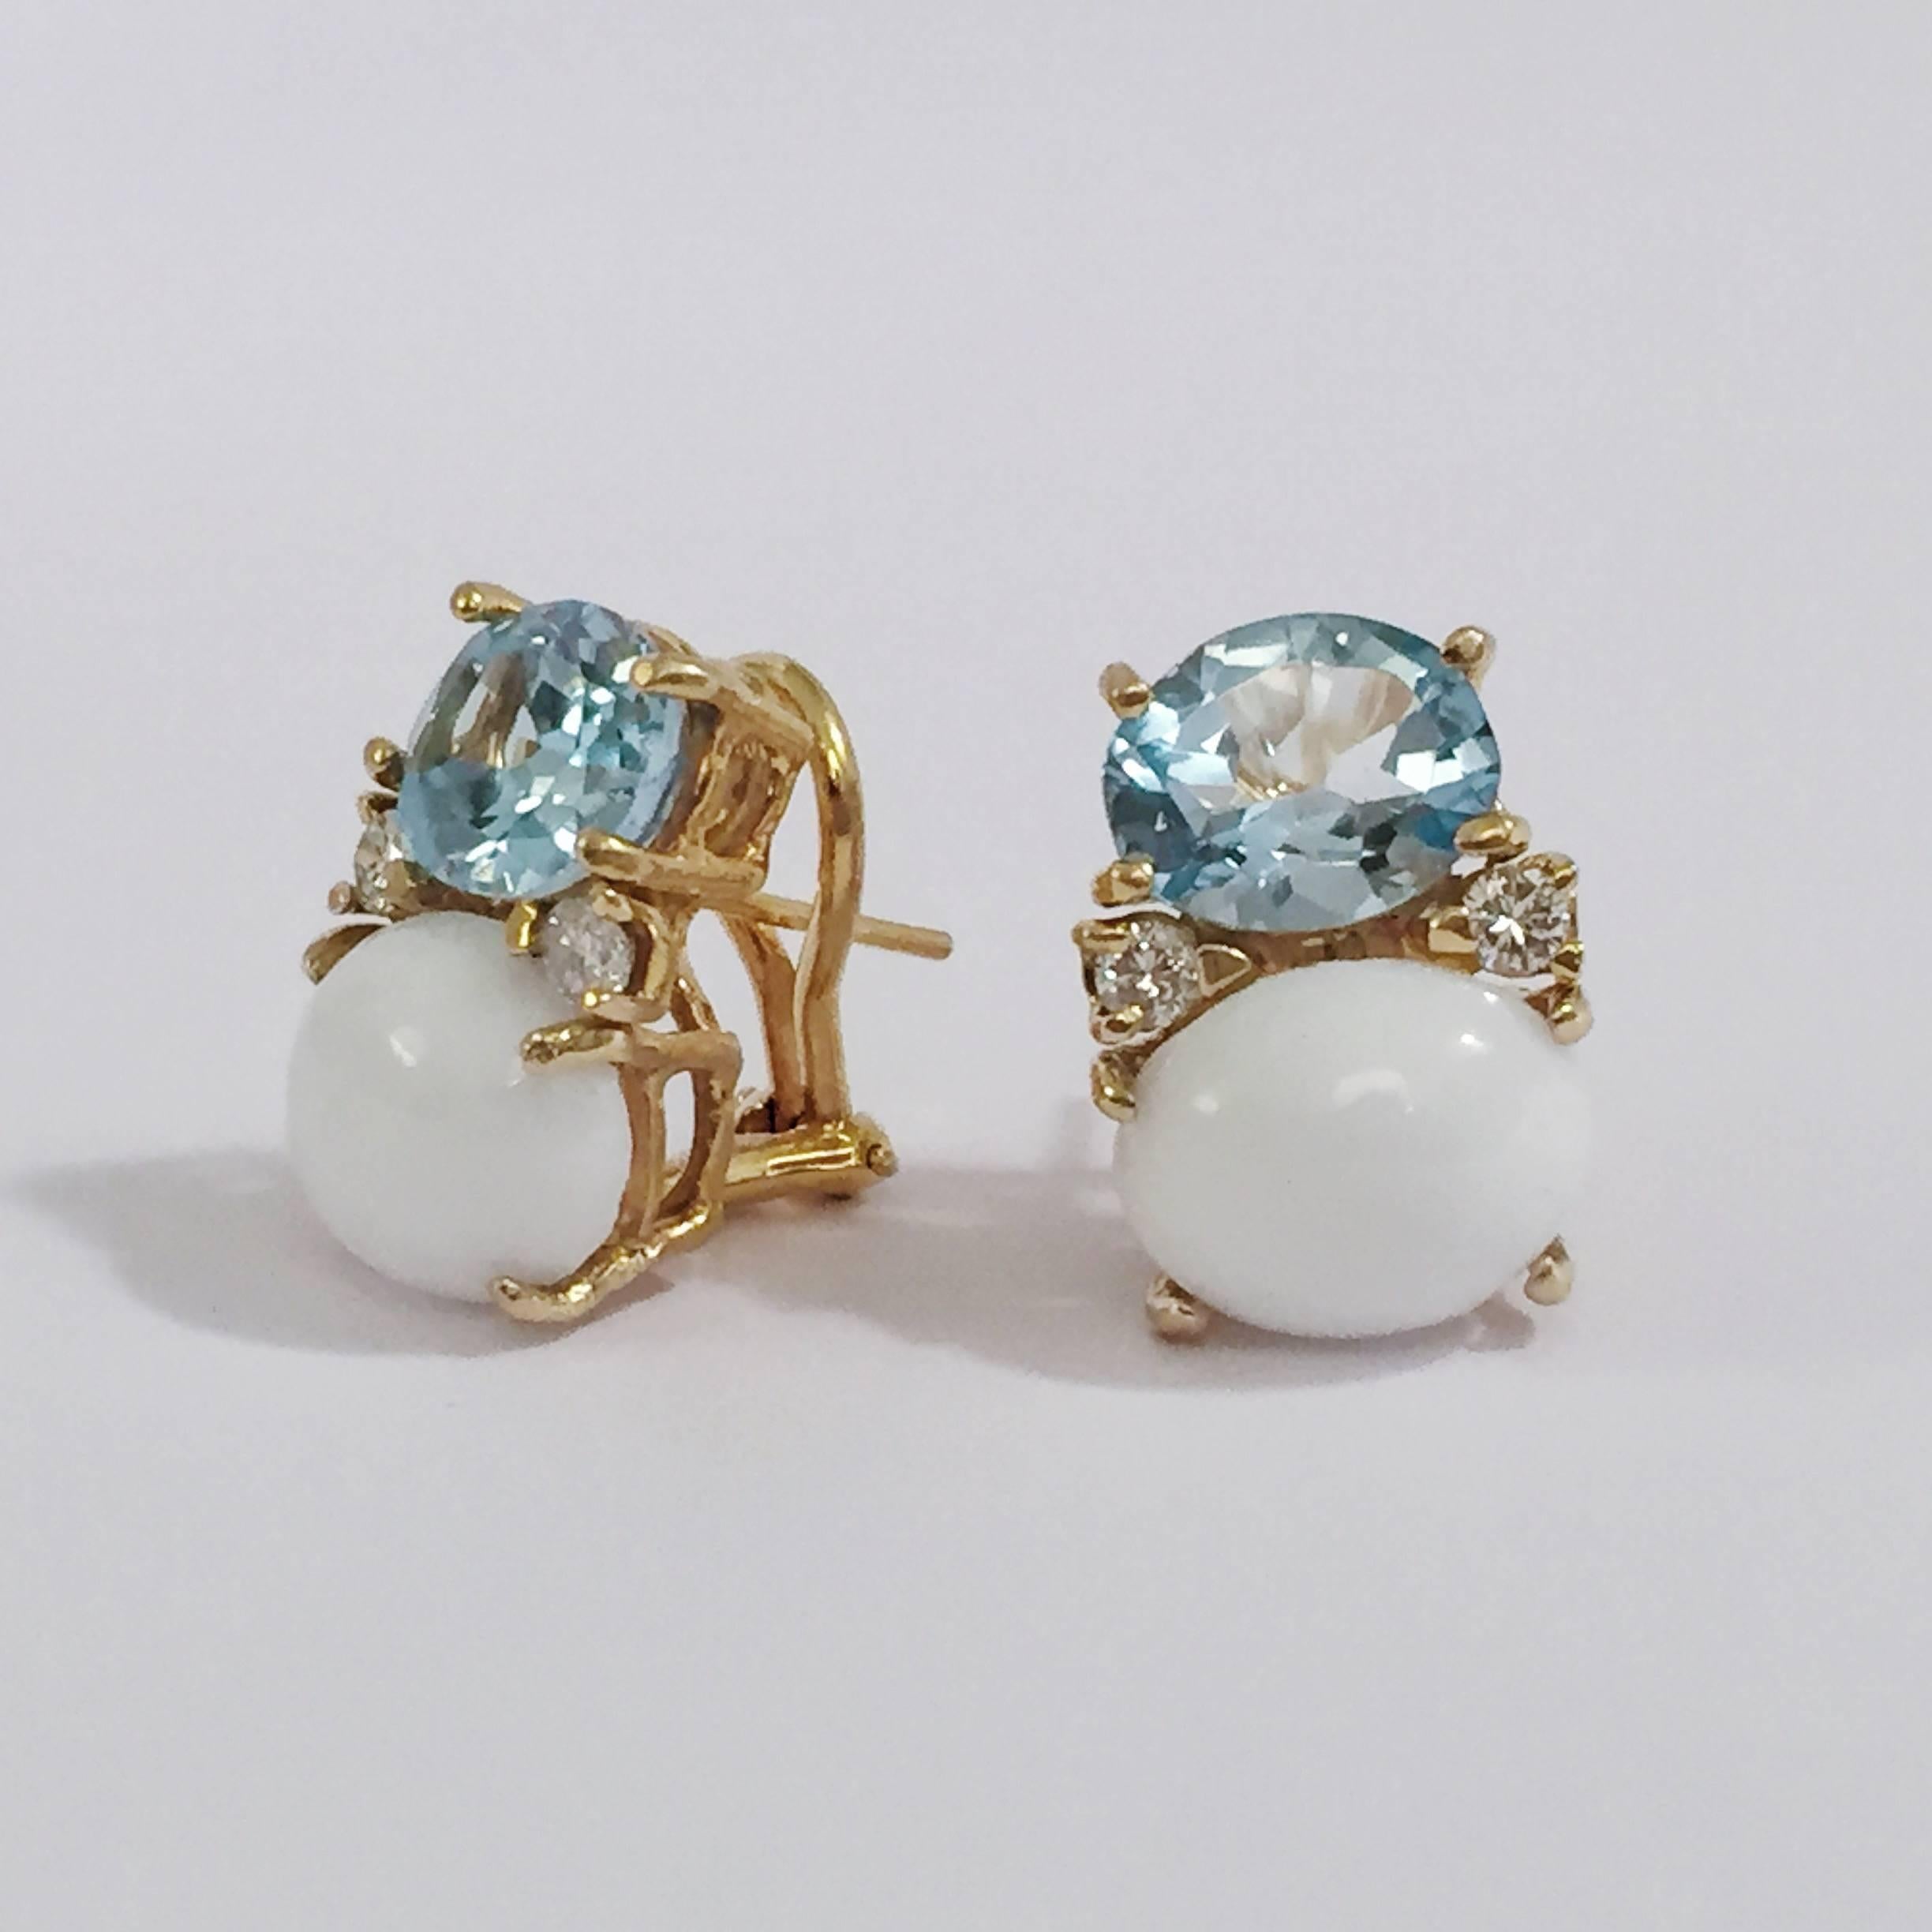 Medium 18kt yellow gold GUM DROP™ earrings with faceted Blue Topaz (approximately 2.5 cts each), cabochon white Jade (approximately 5 cts each), and 4 diamonds weighing ~0.40 cts.   

Specifications: Height: 3/4